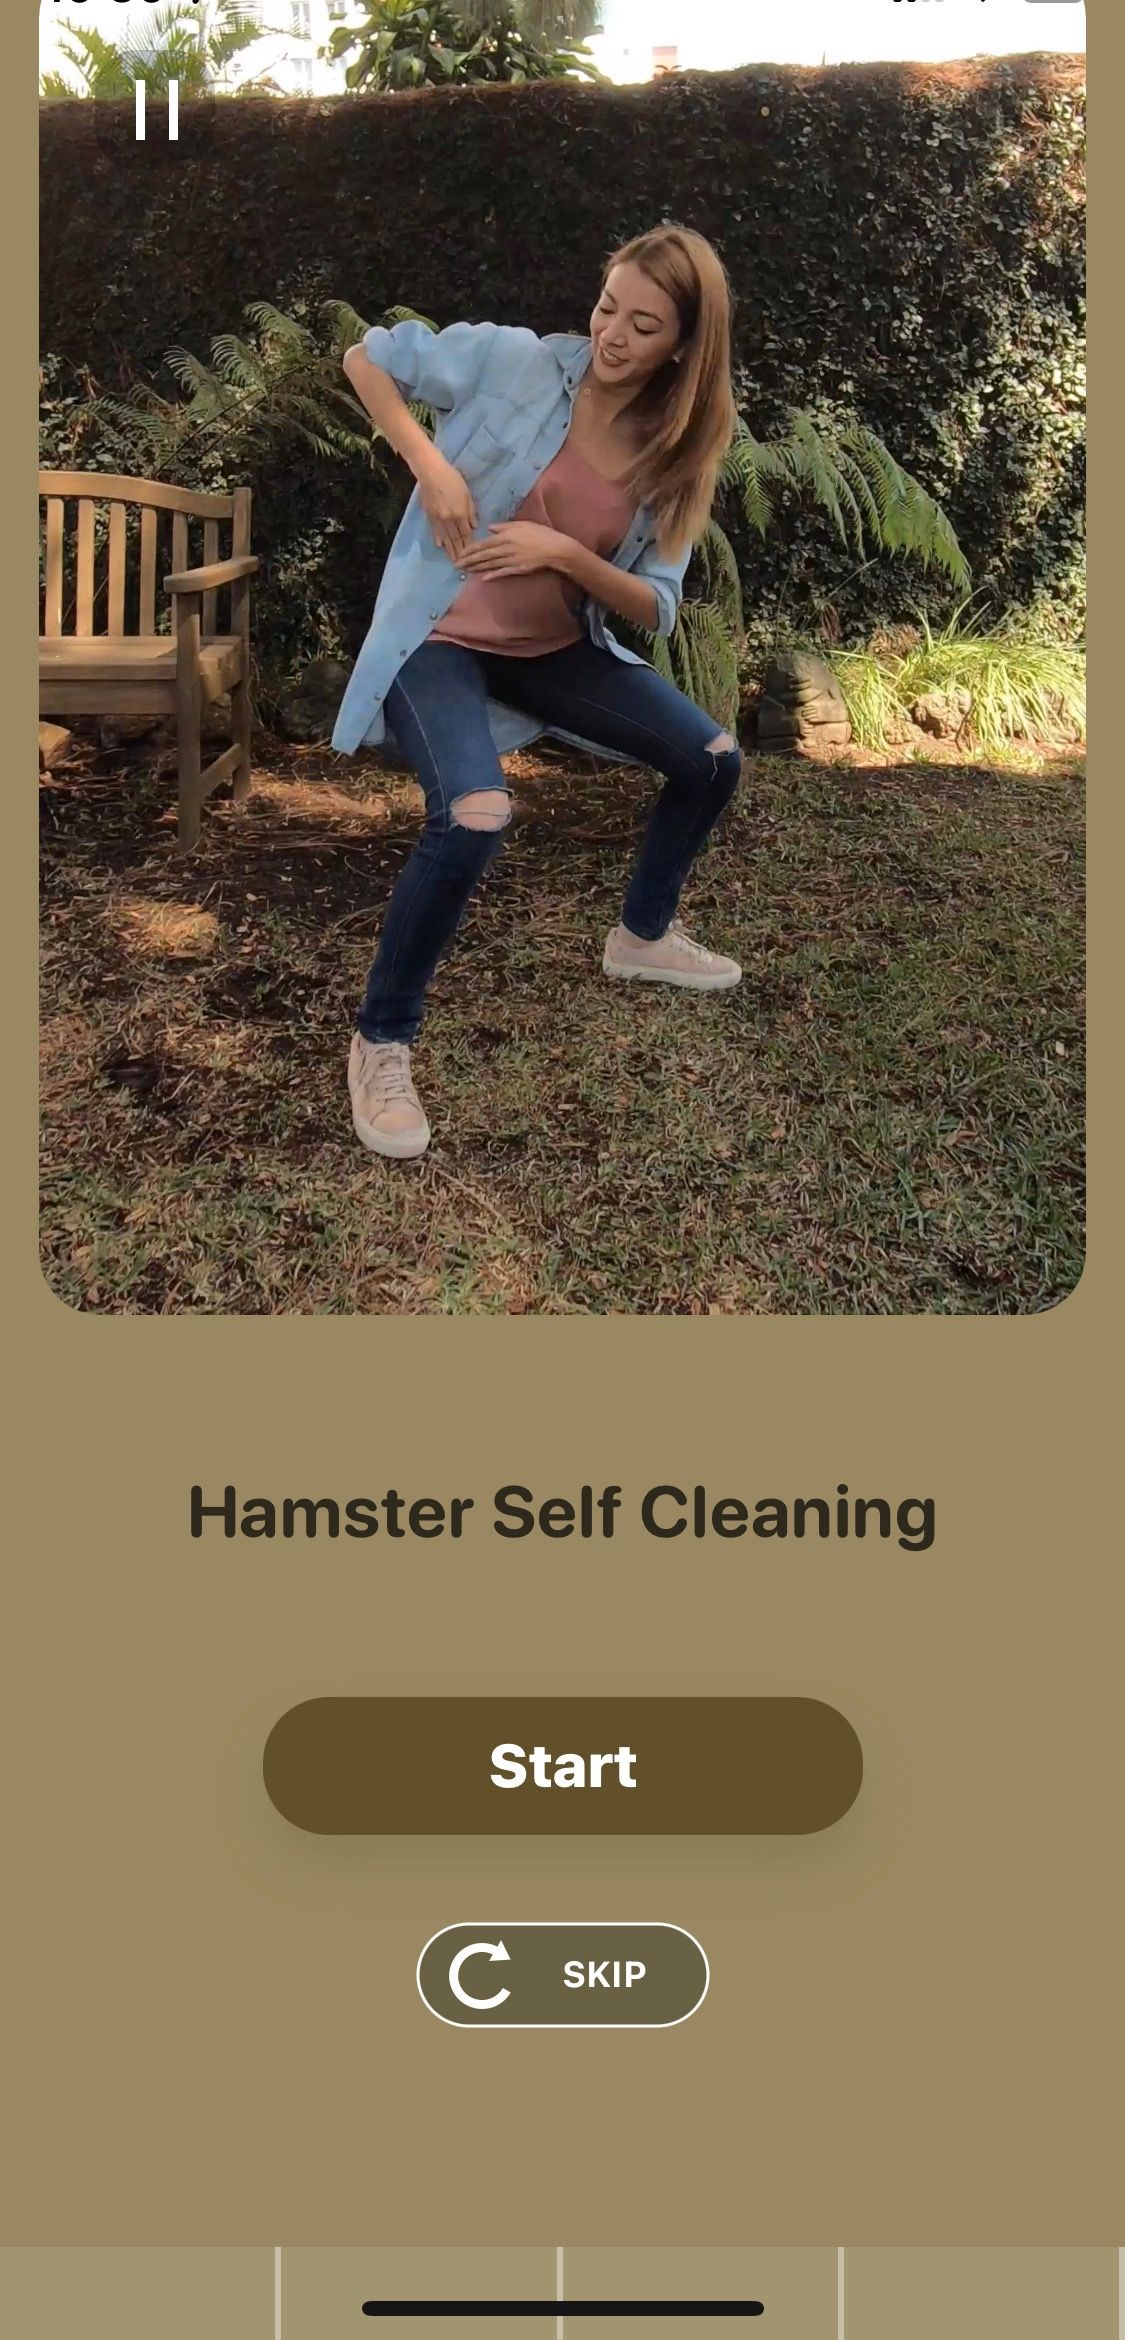 Screenshot of Wakeout app showing the hamster self cleaning exercise screen